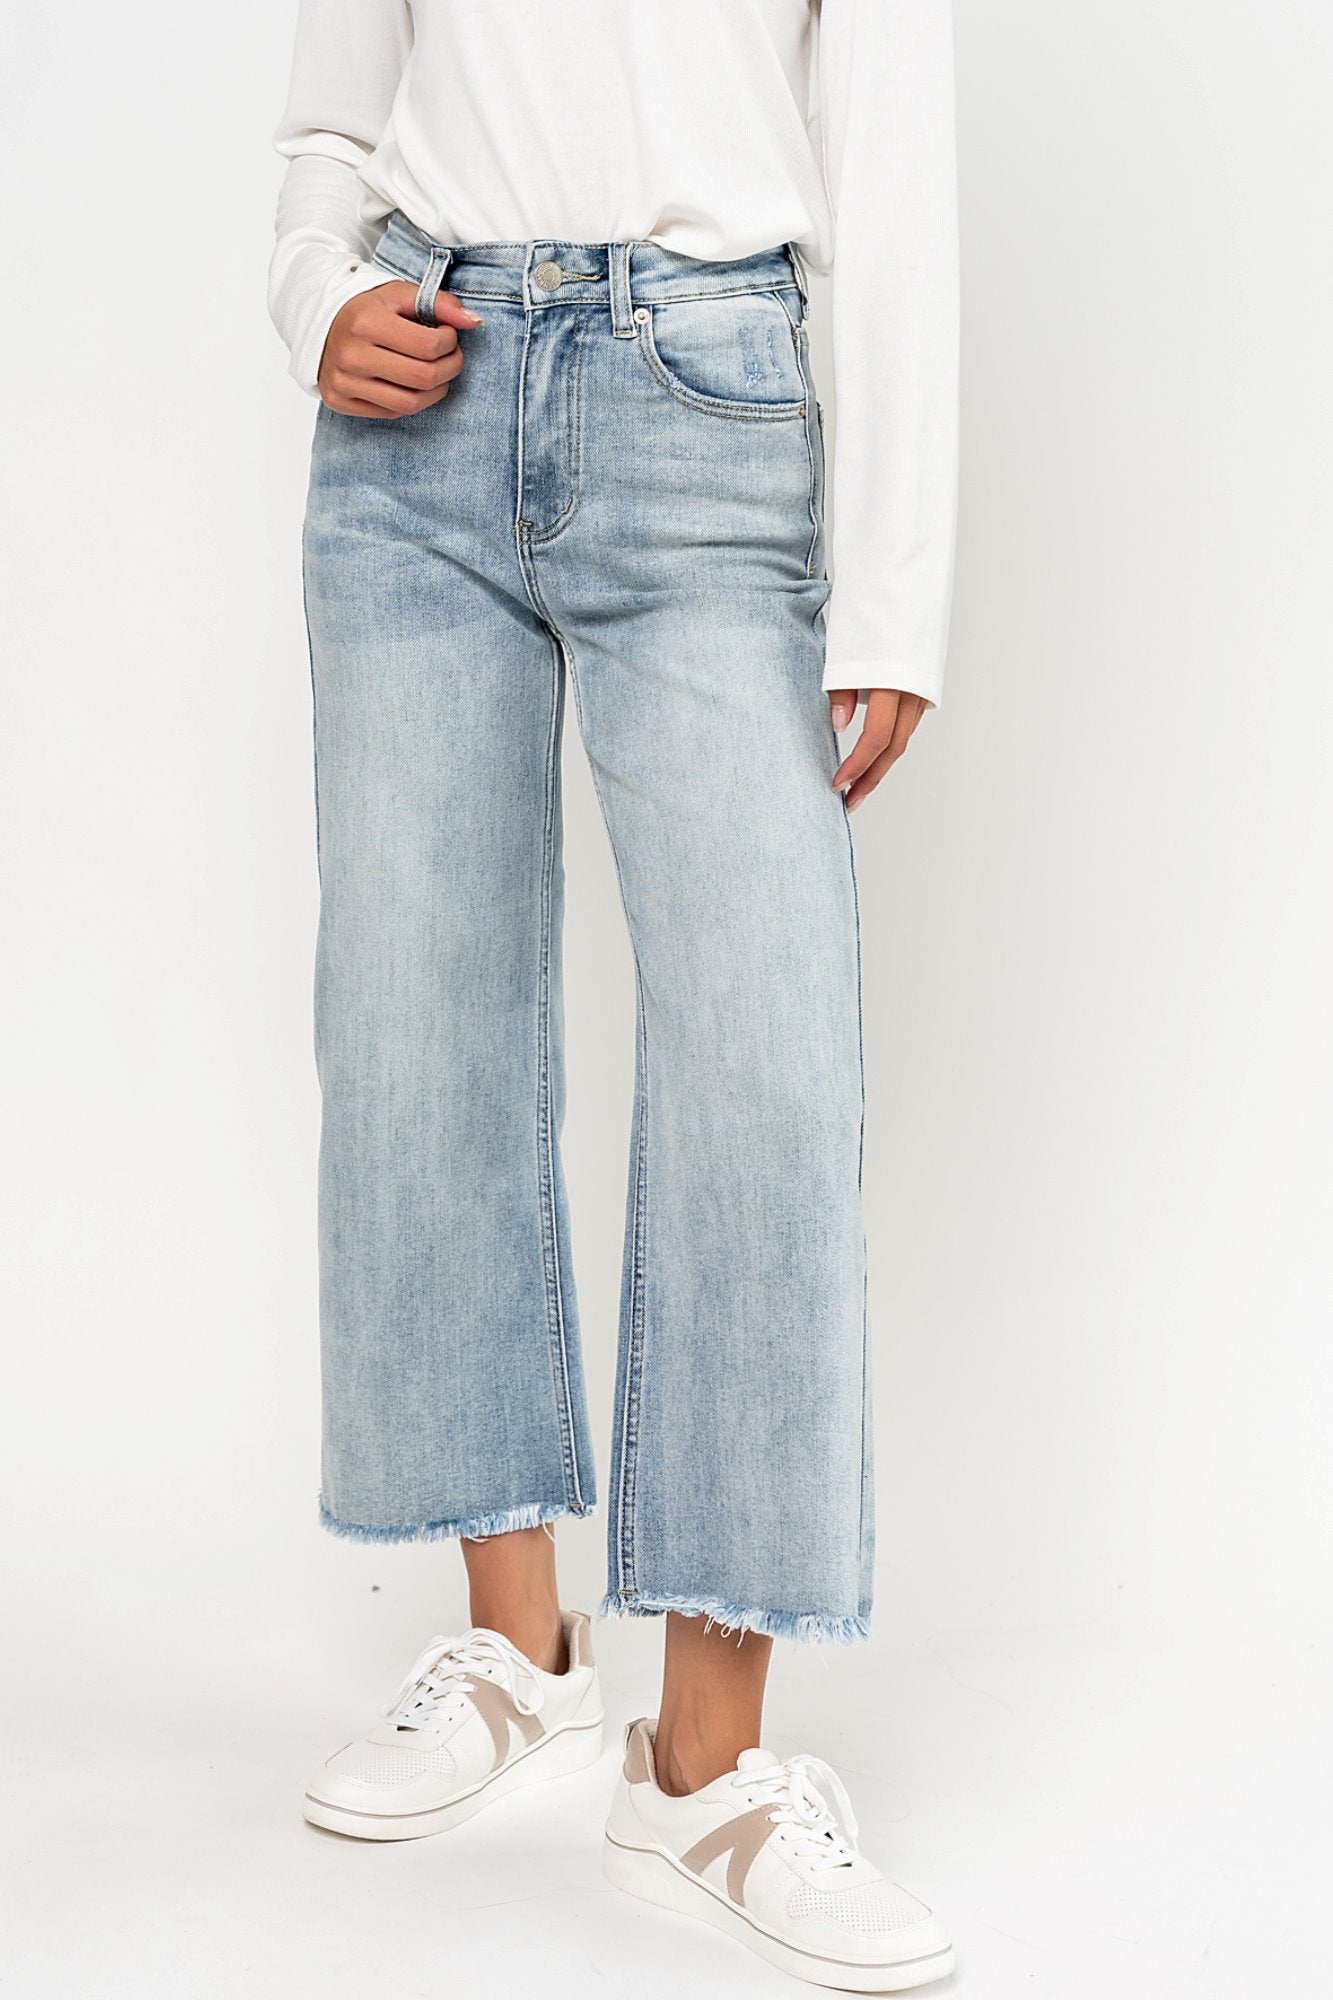 Griffin Jeans in Light Denim Holley Girl 